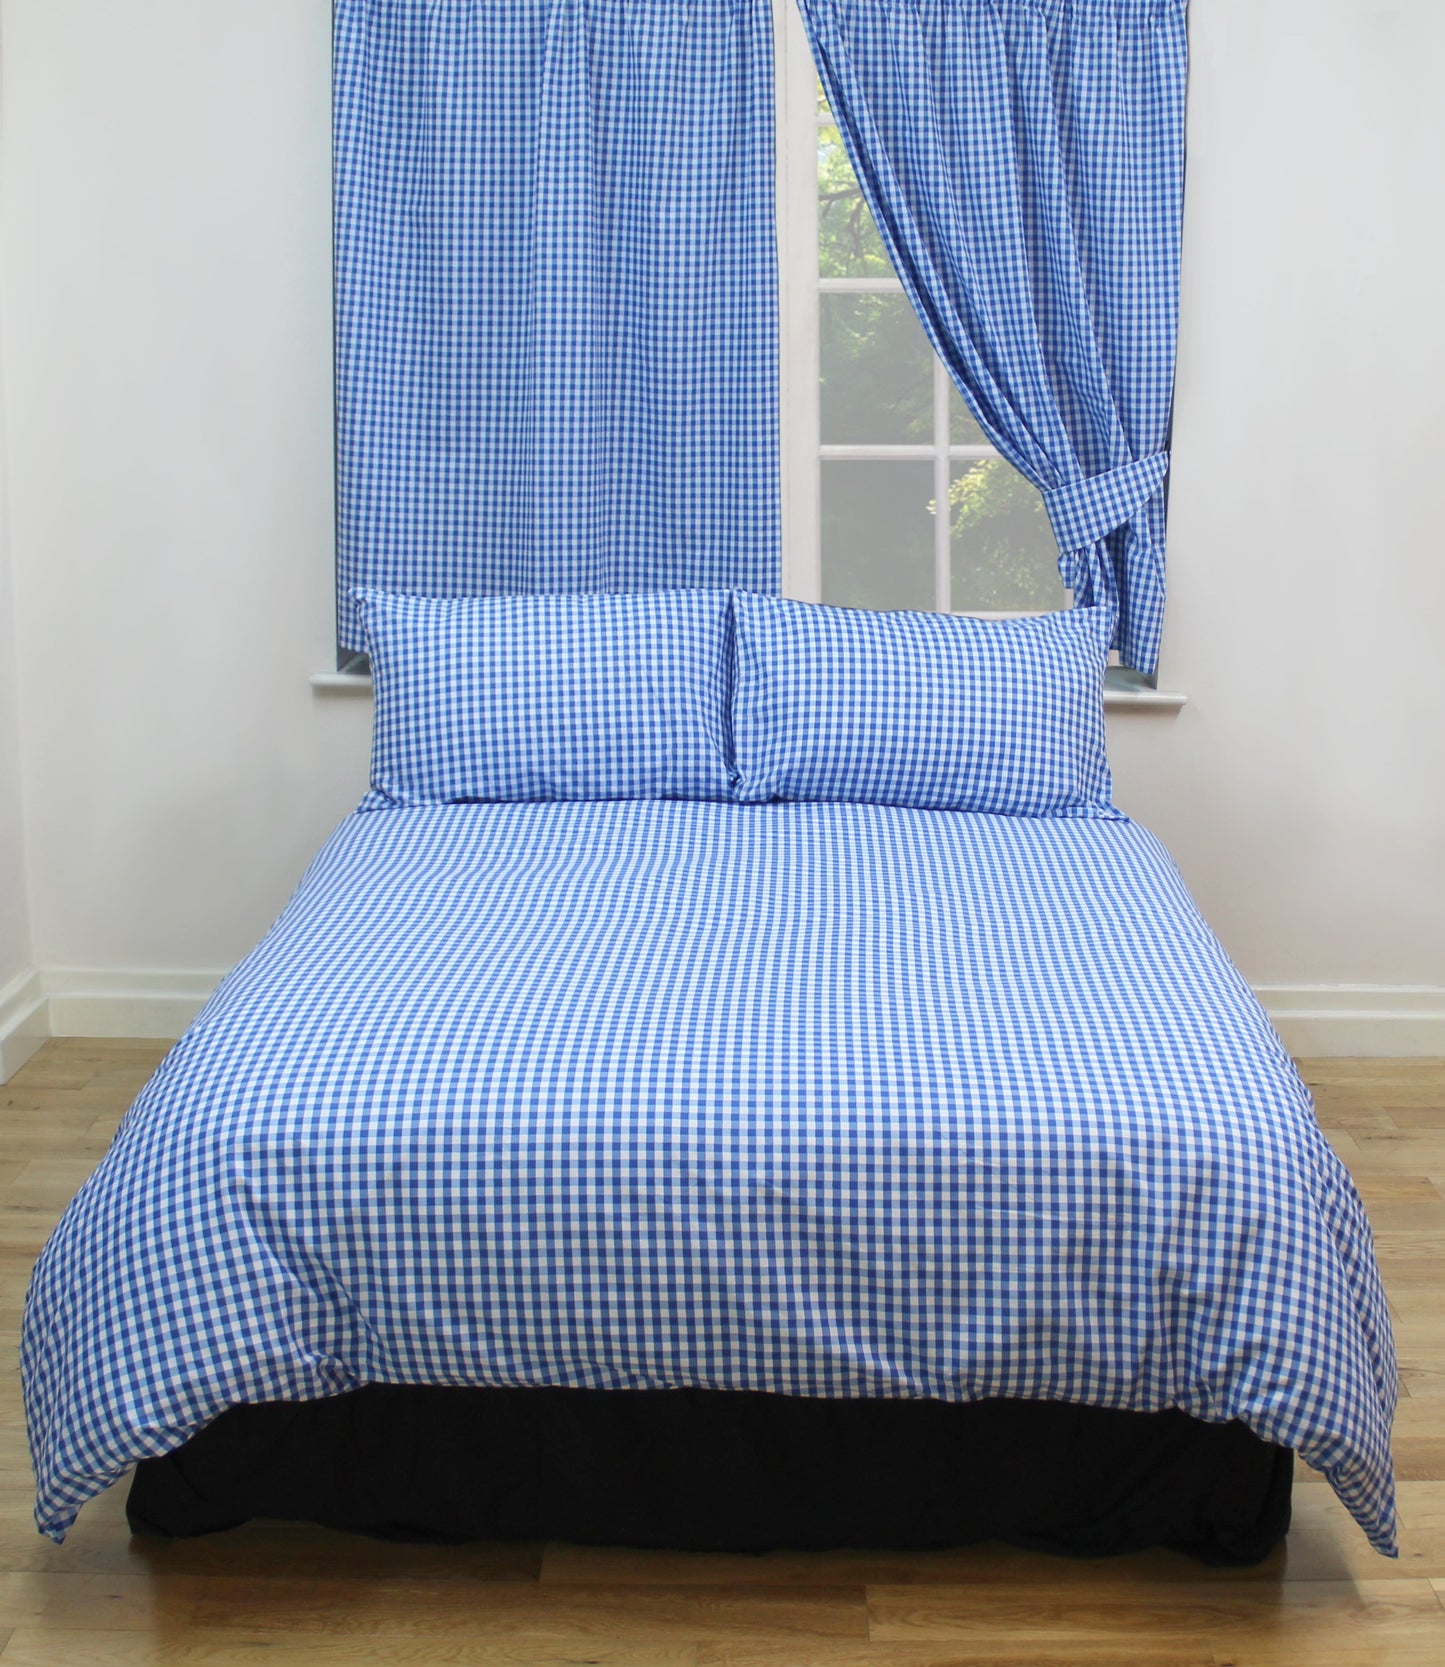 Double Bed Gingham Check Blue White Duvet Cover Set 100% Natural Cotton